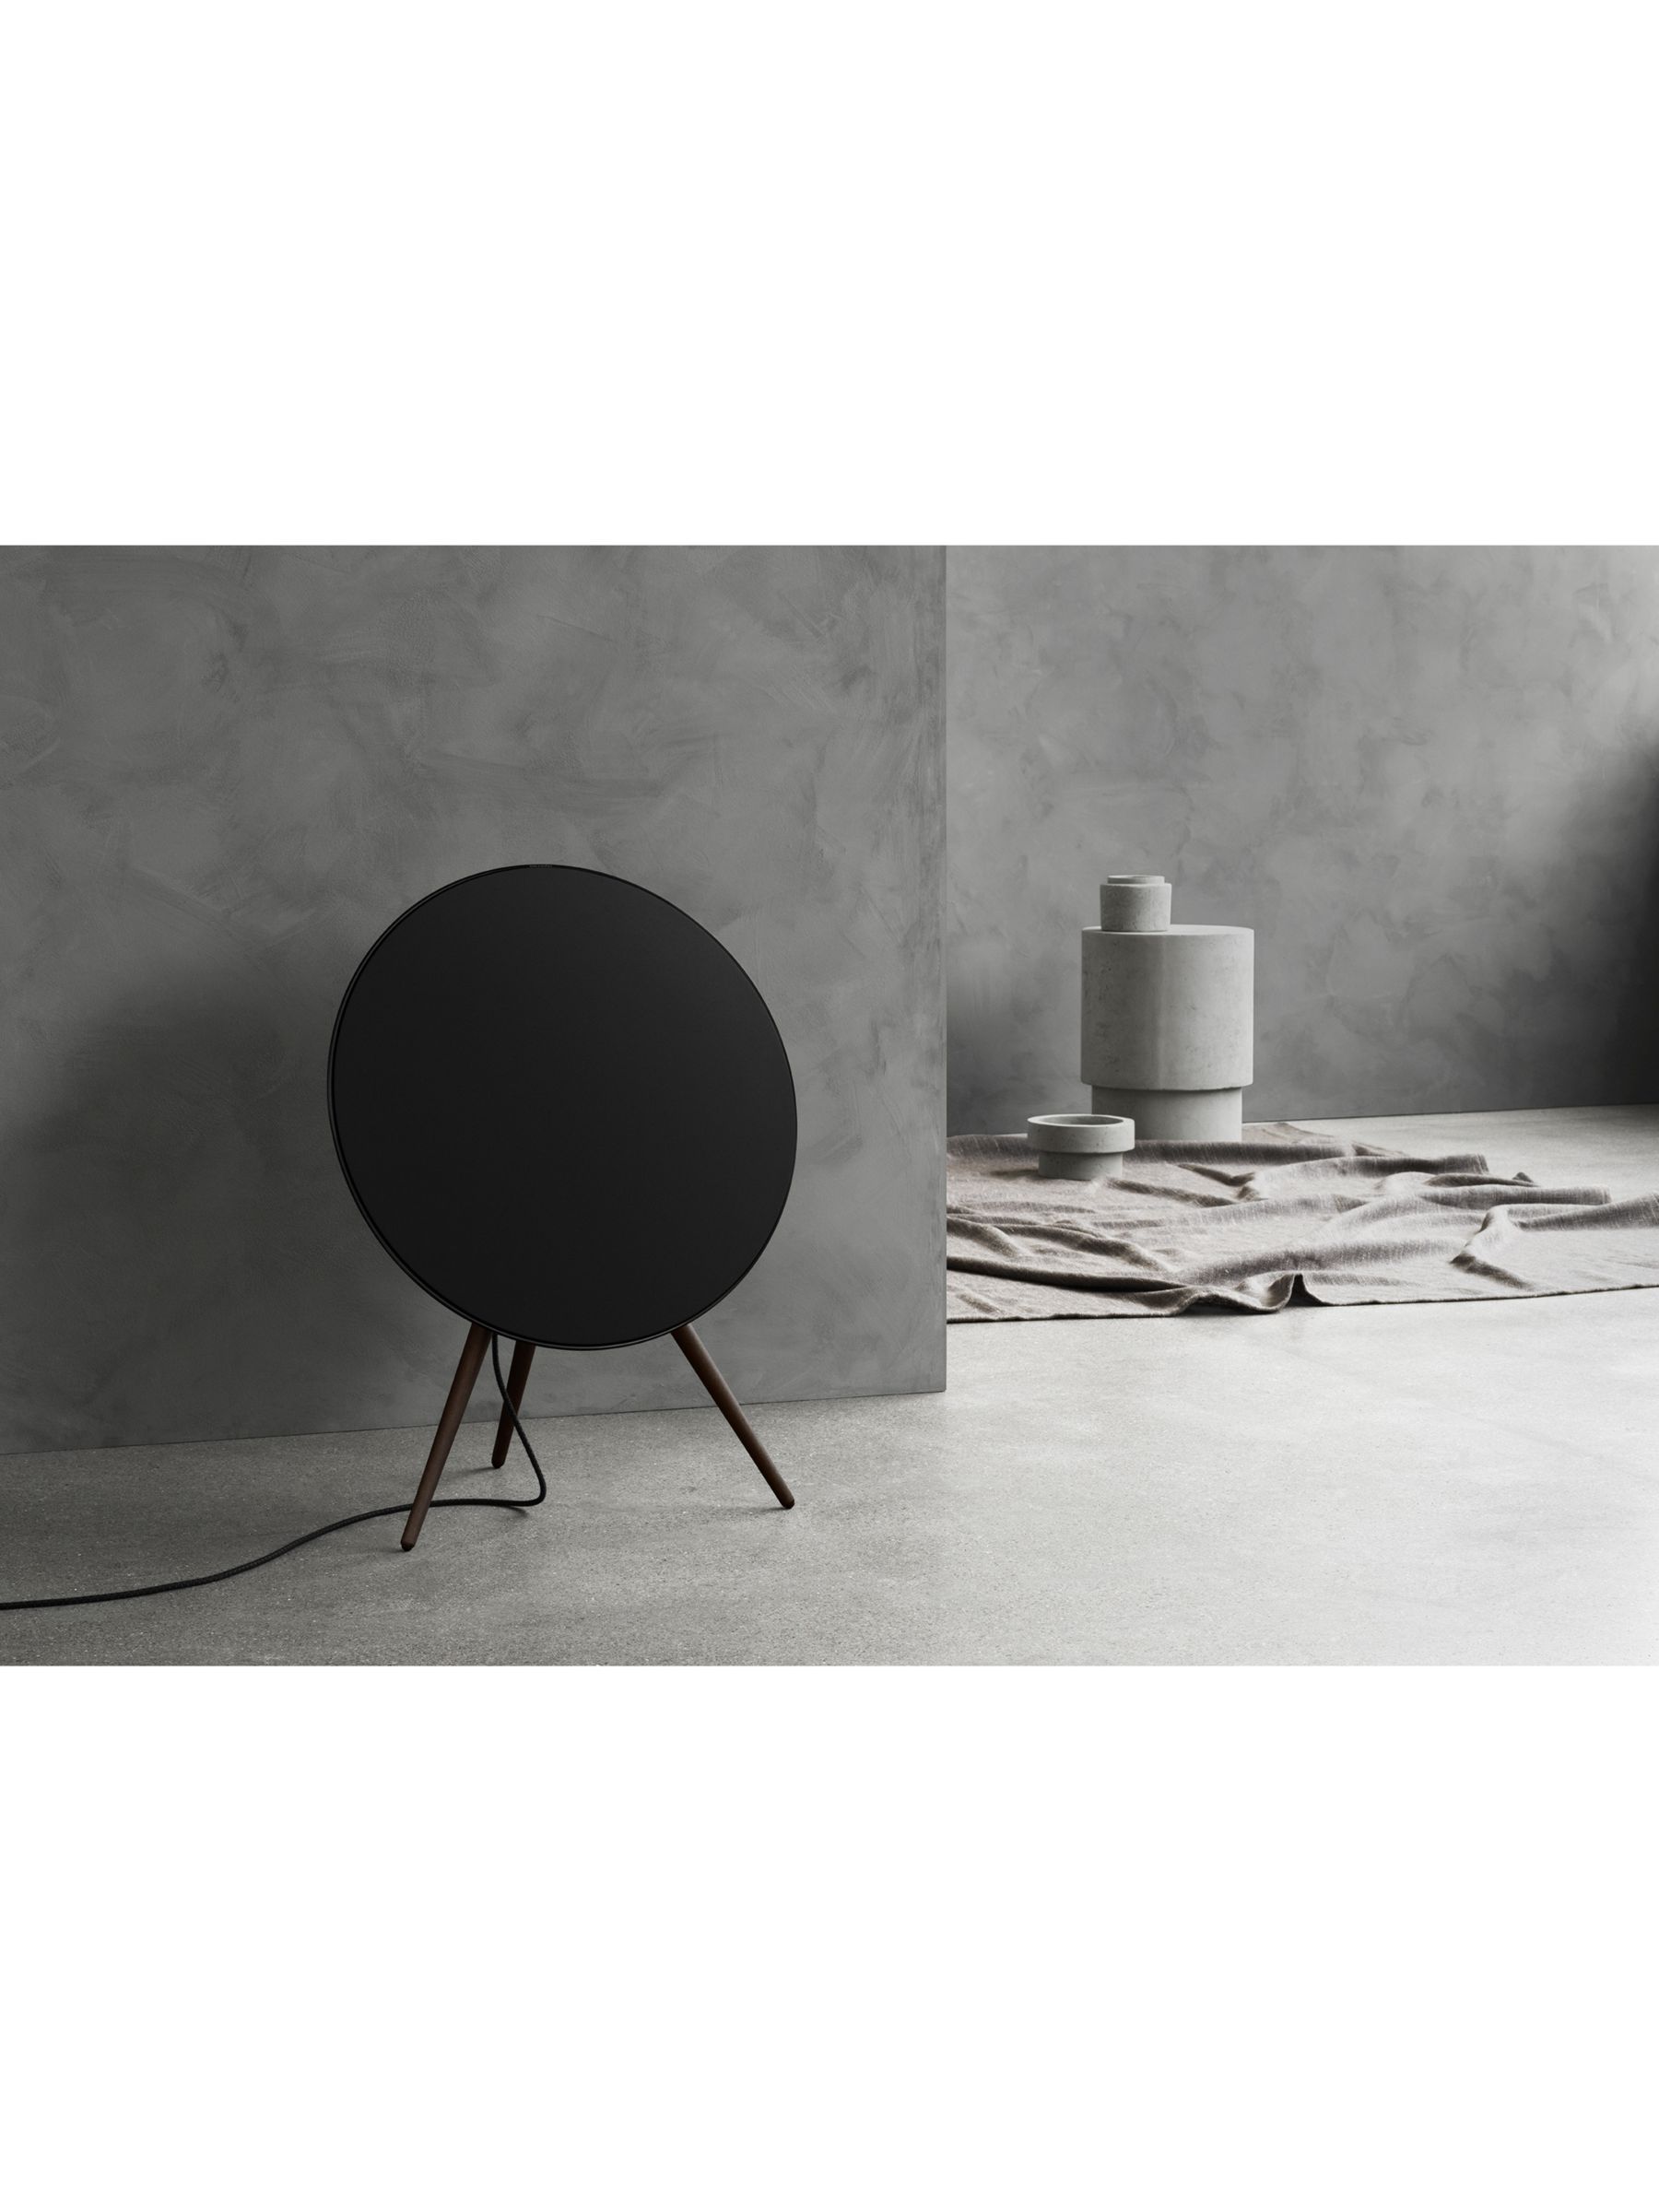 Bang & Olufsen Beoplay A9 (4th Generation) Bluetooth Music System with Airplay 2, Chromecast